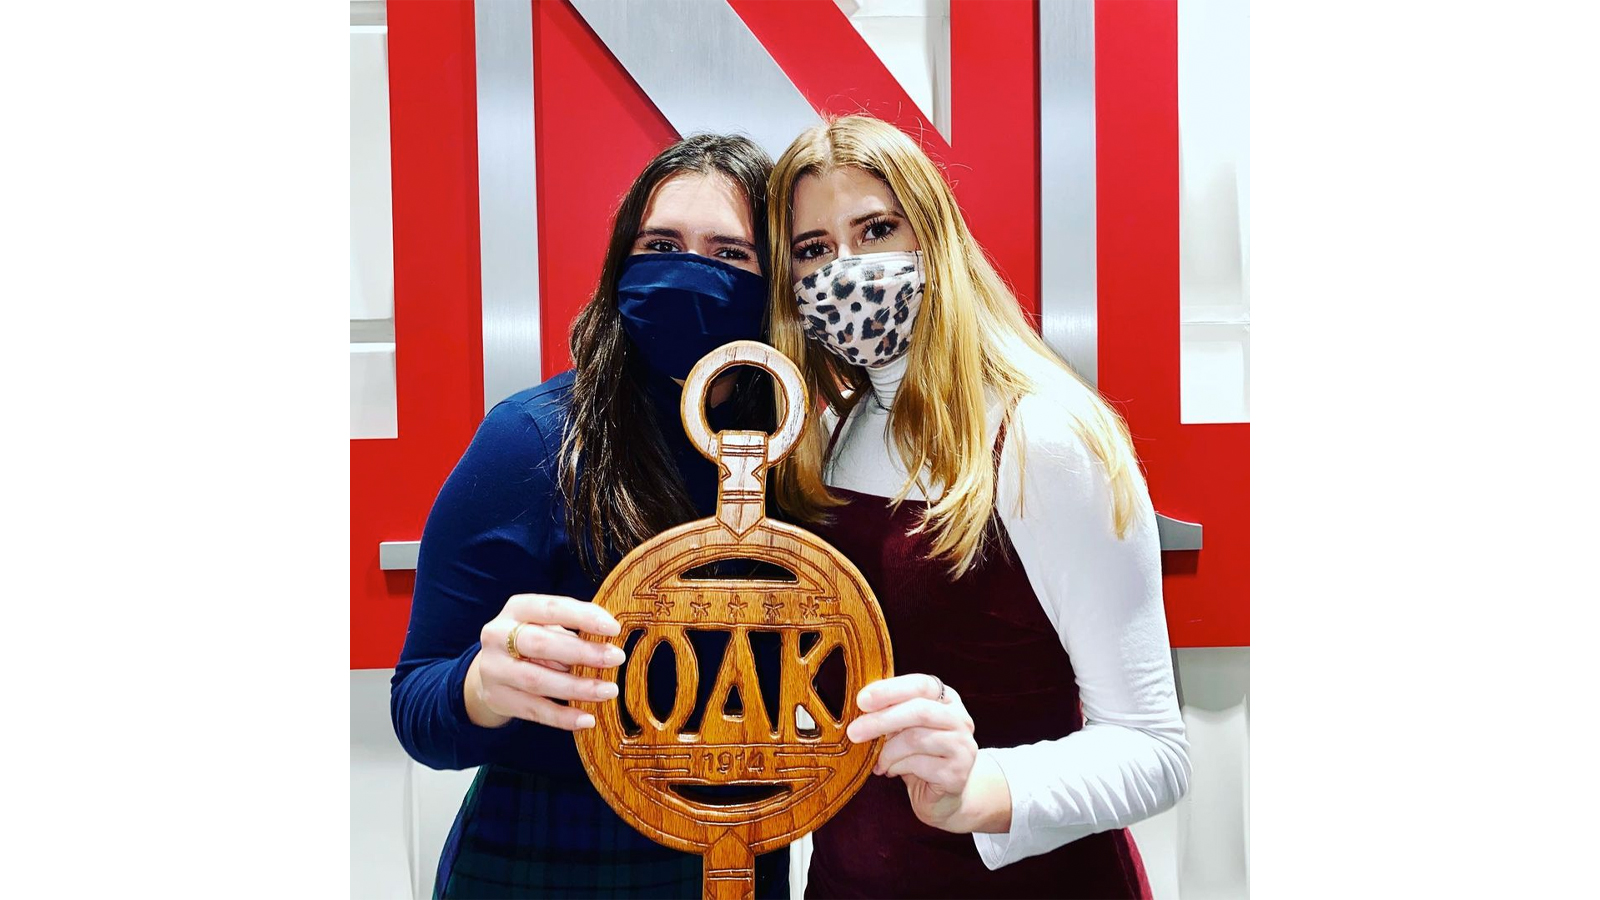 Corrie Day, a senior psychology major, and other new member educators of the Omicron Delta Kappa honors fraternity celebrated their recruiting successes. Learn more at https://go.unl.edu/6ioc.